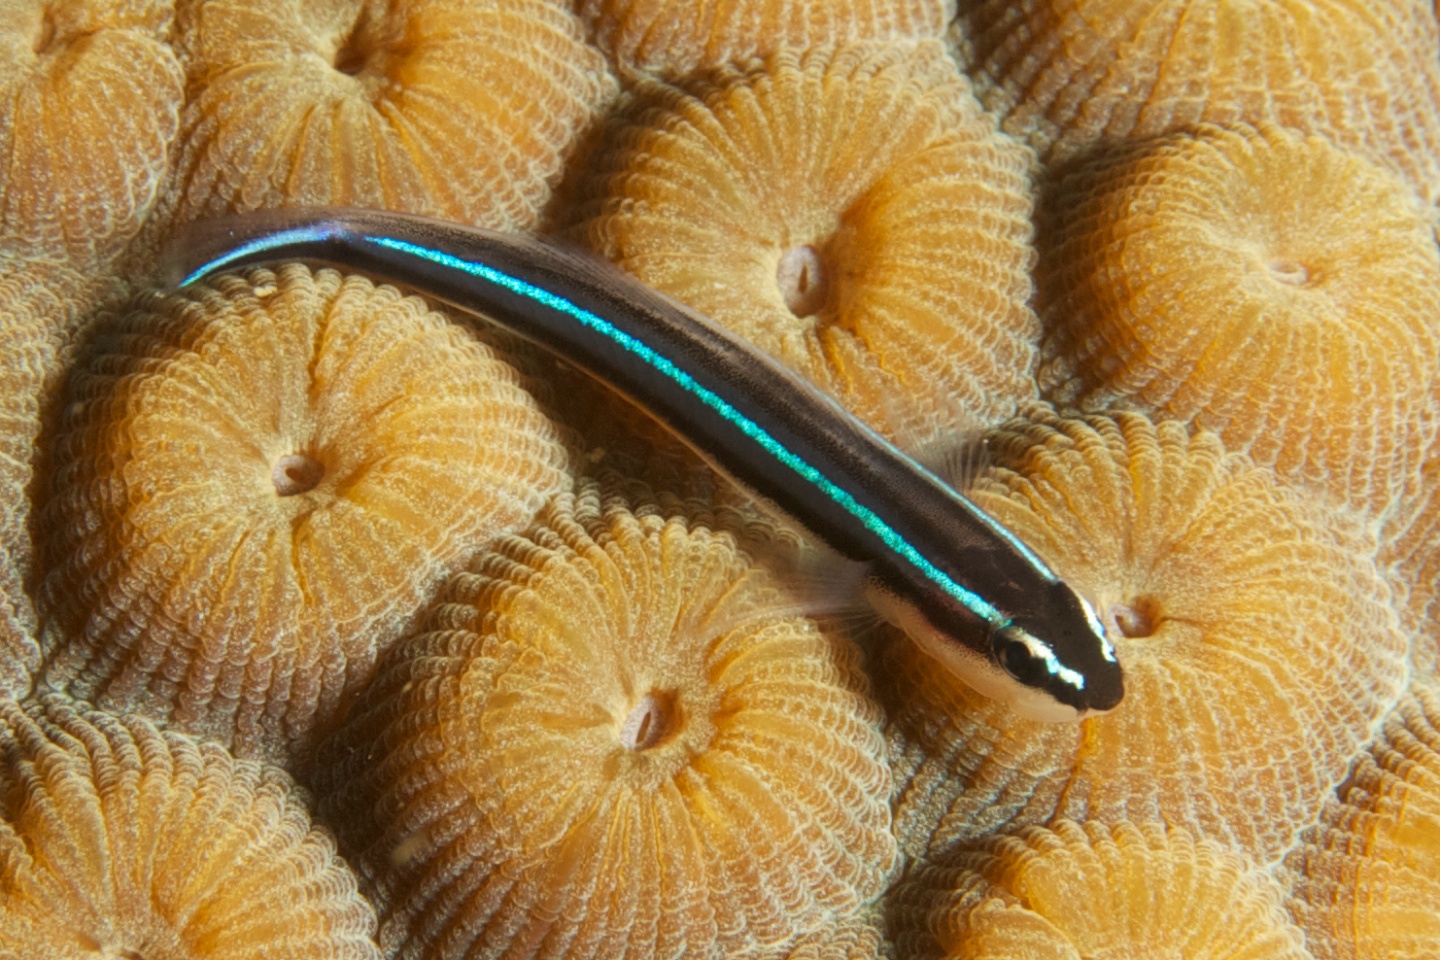 Neon goby